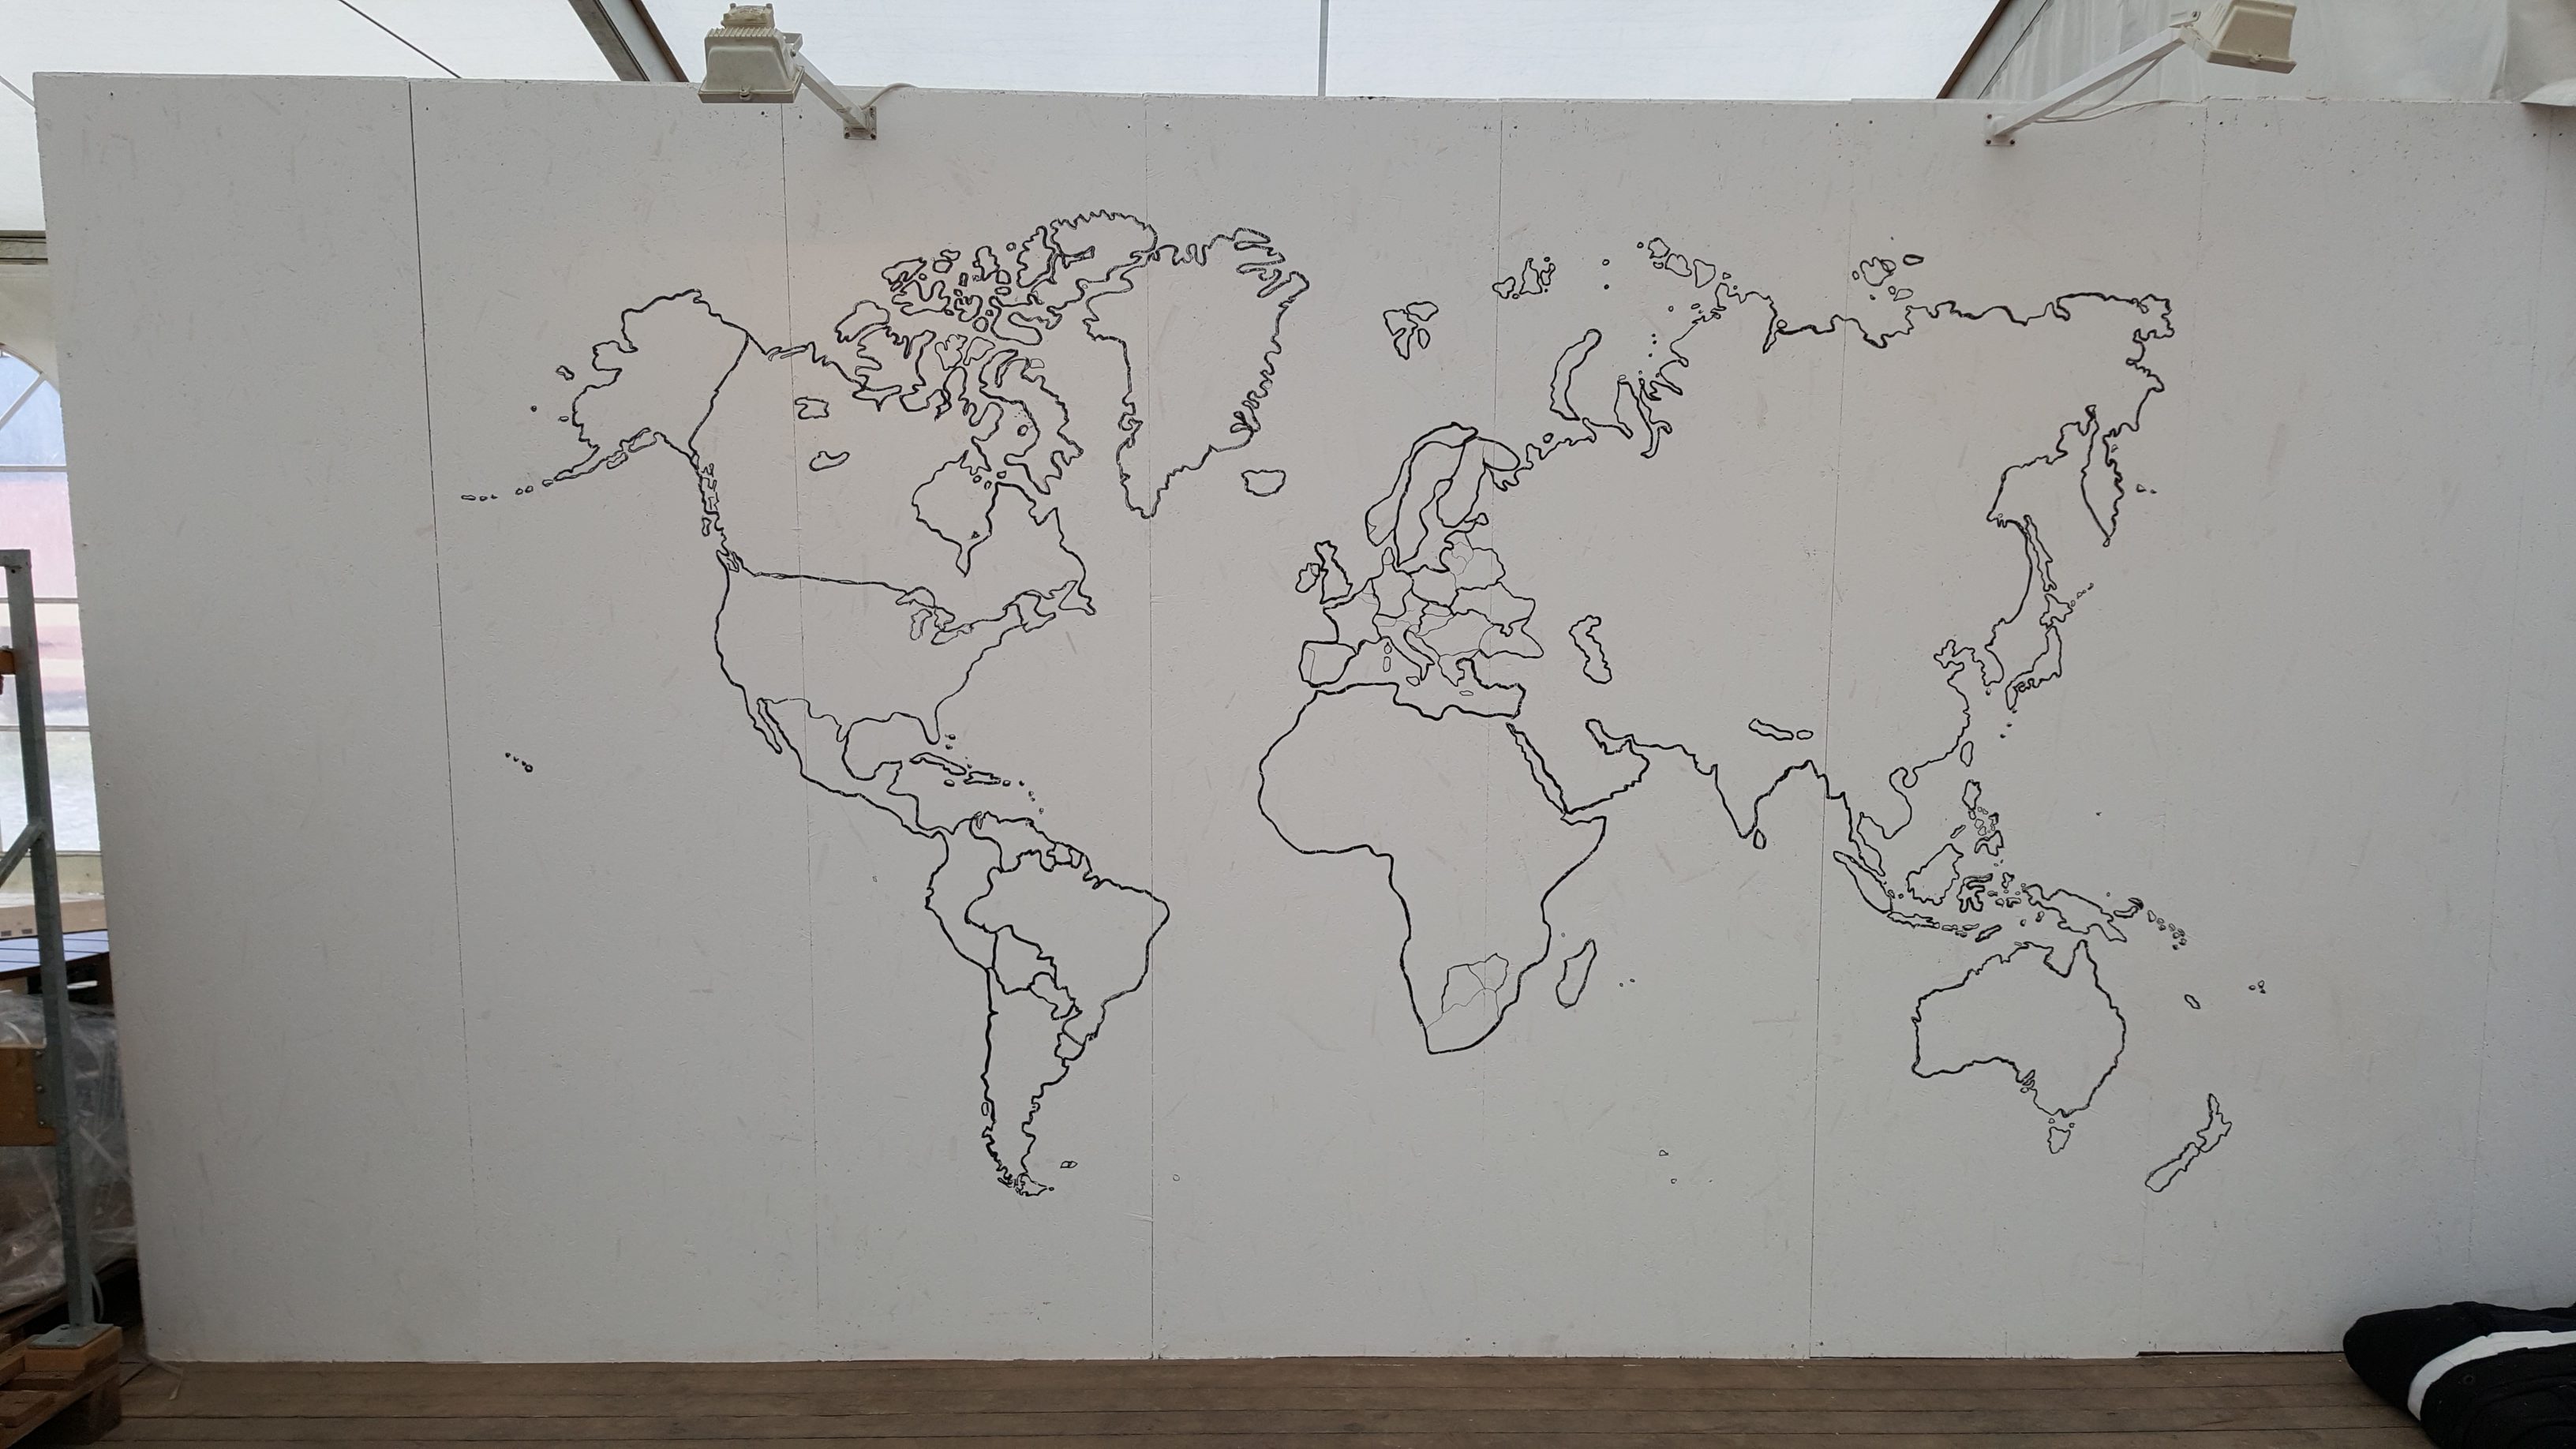 This wall in the dining tent is decorated with a world map in recognition of our internationality